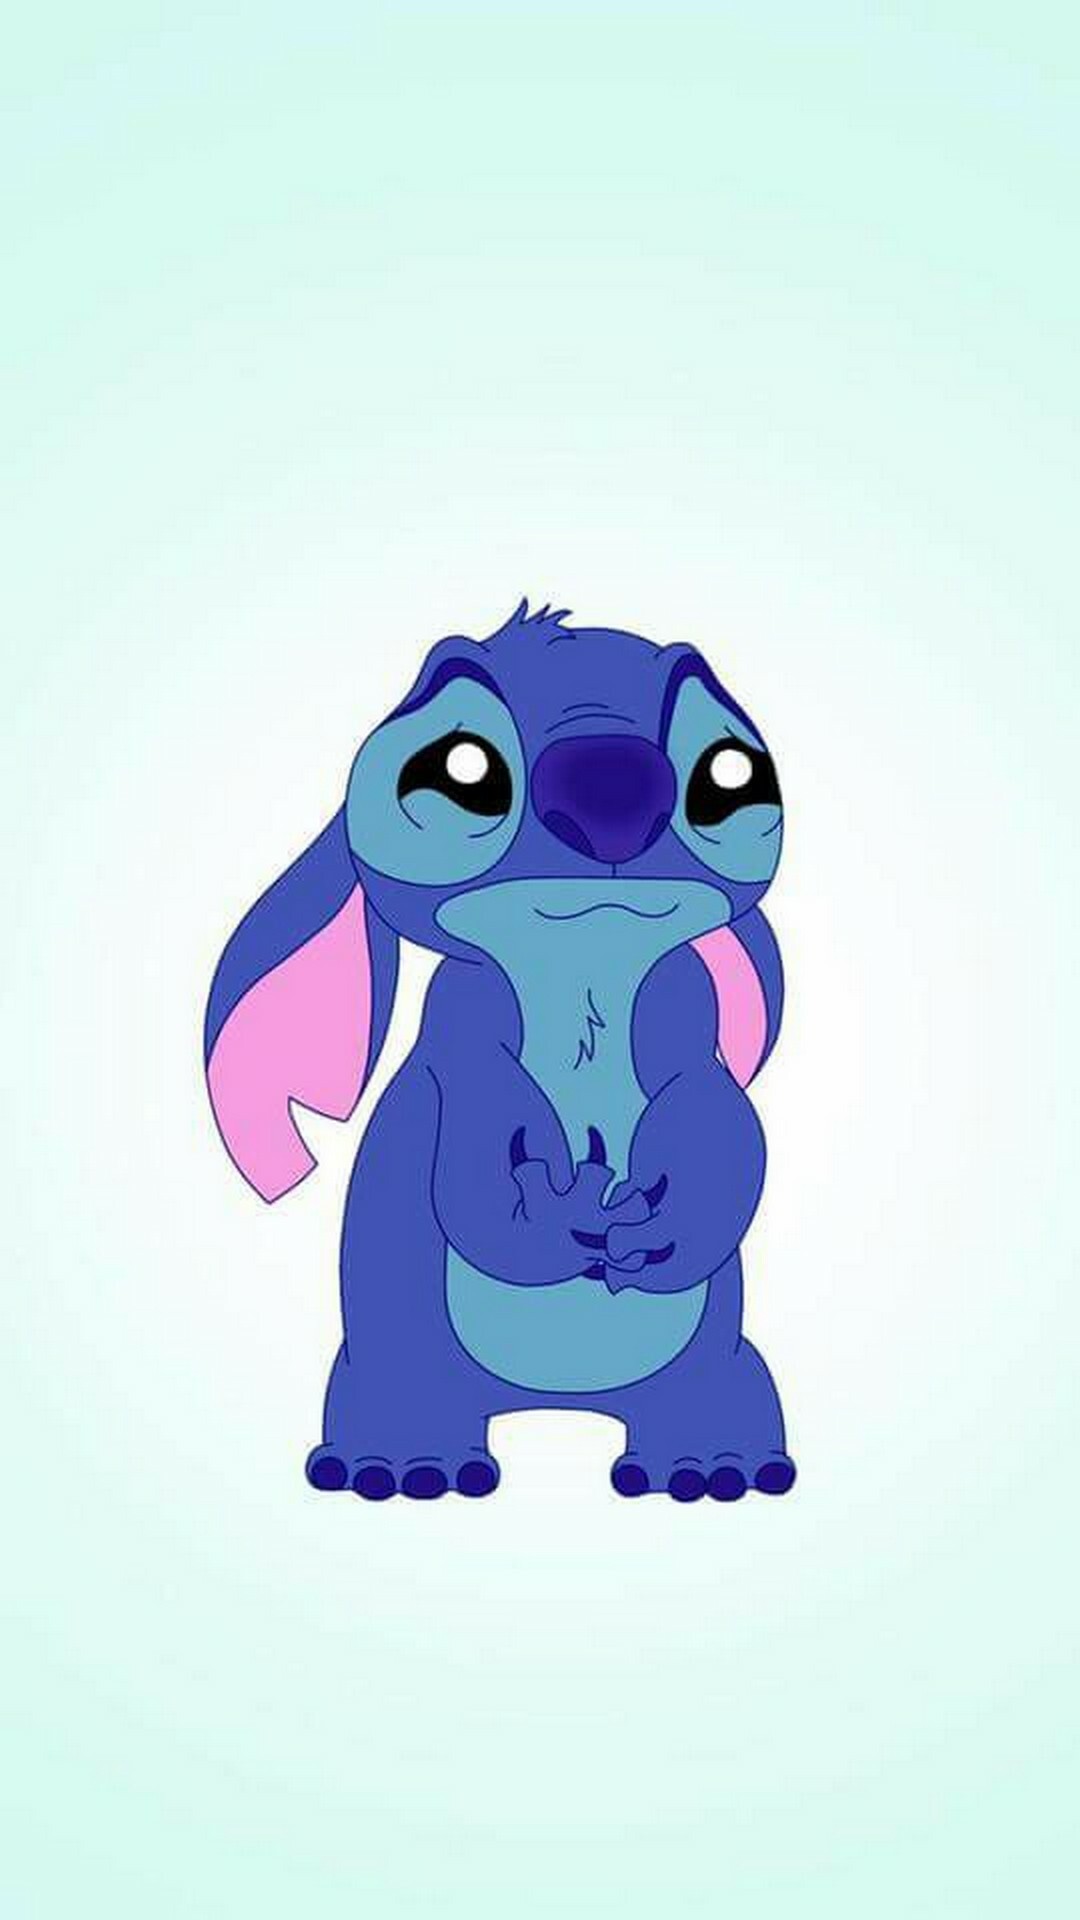 Lilo and Stitch: Experiment 626, designed to be abnormally strong, virtually indestructible, and super-intelligent. 1080x1920 Full HD Wallpaper.